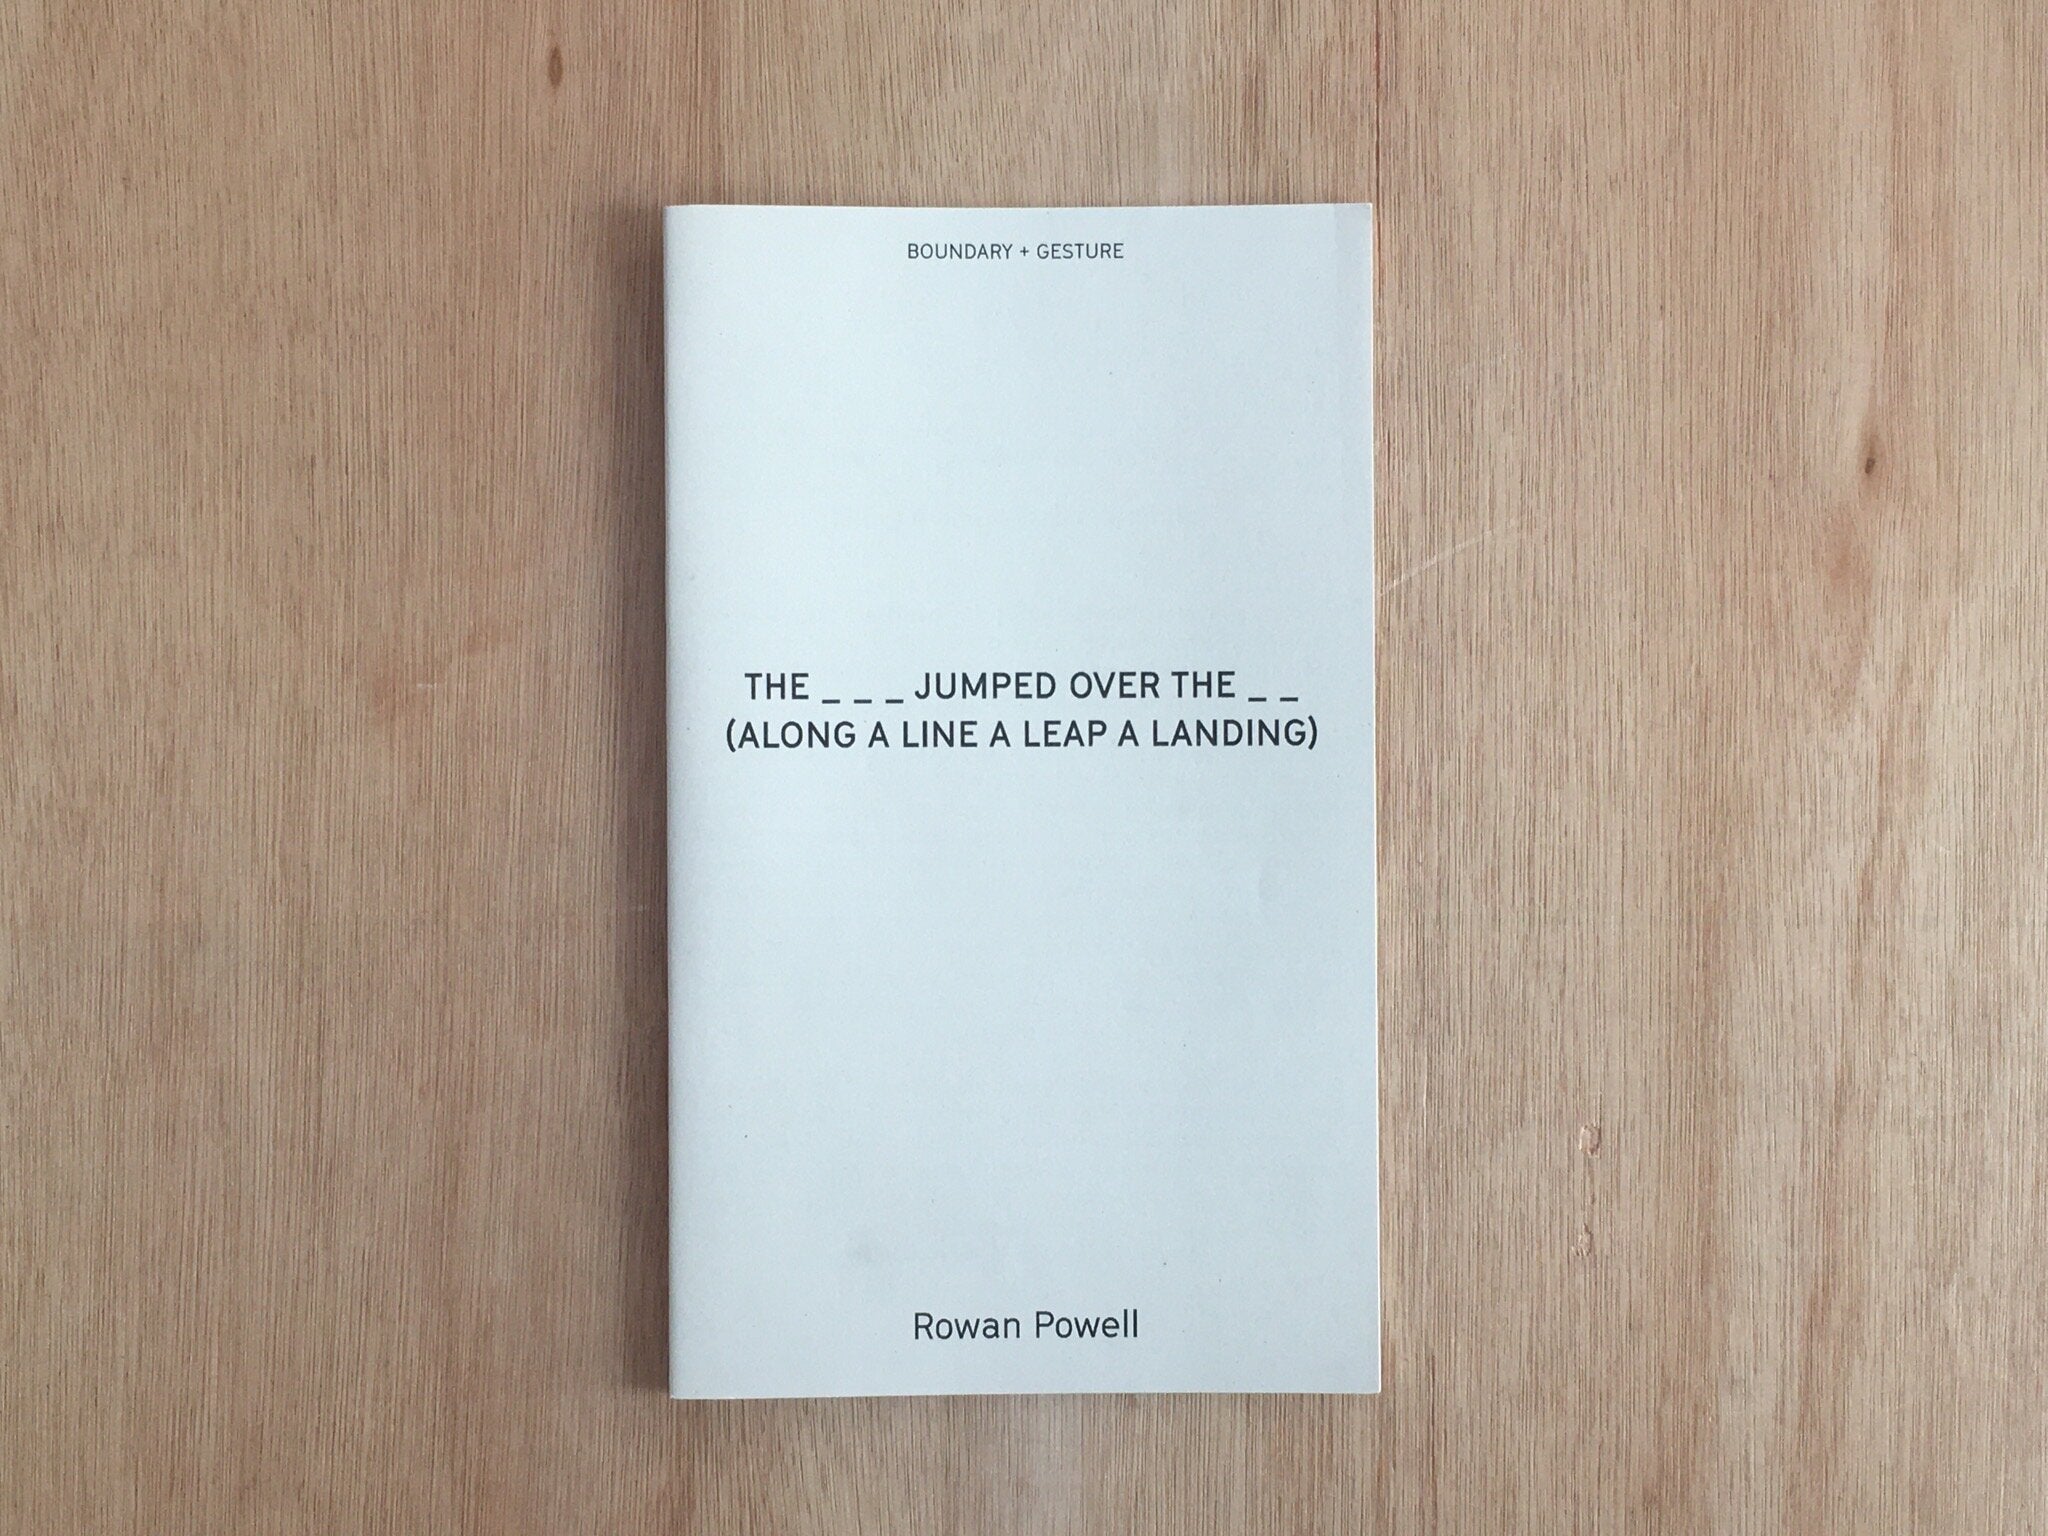 THE ___ JUMPED OVER THE ___ by Rowan Powell